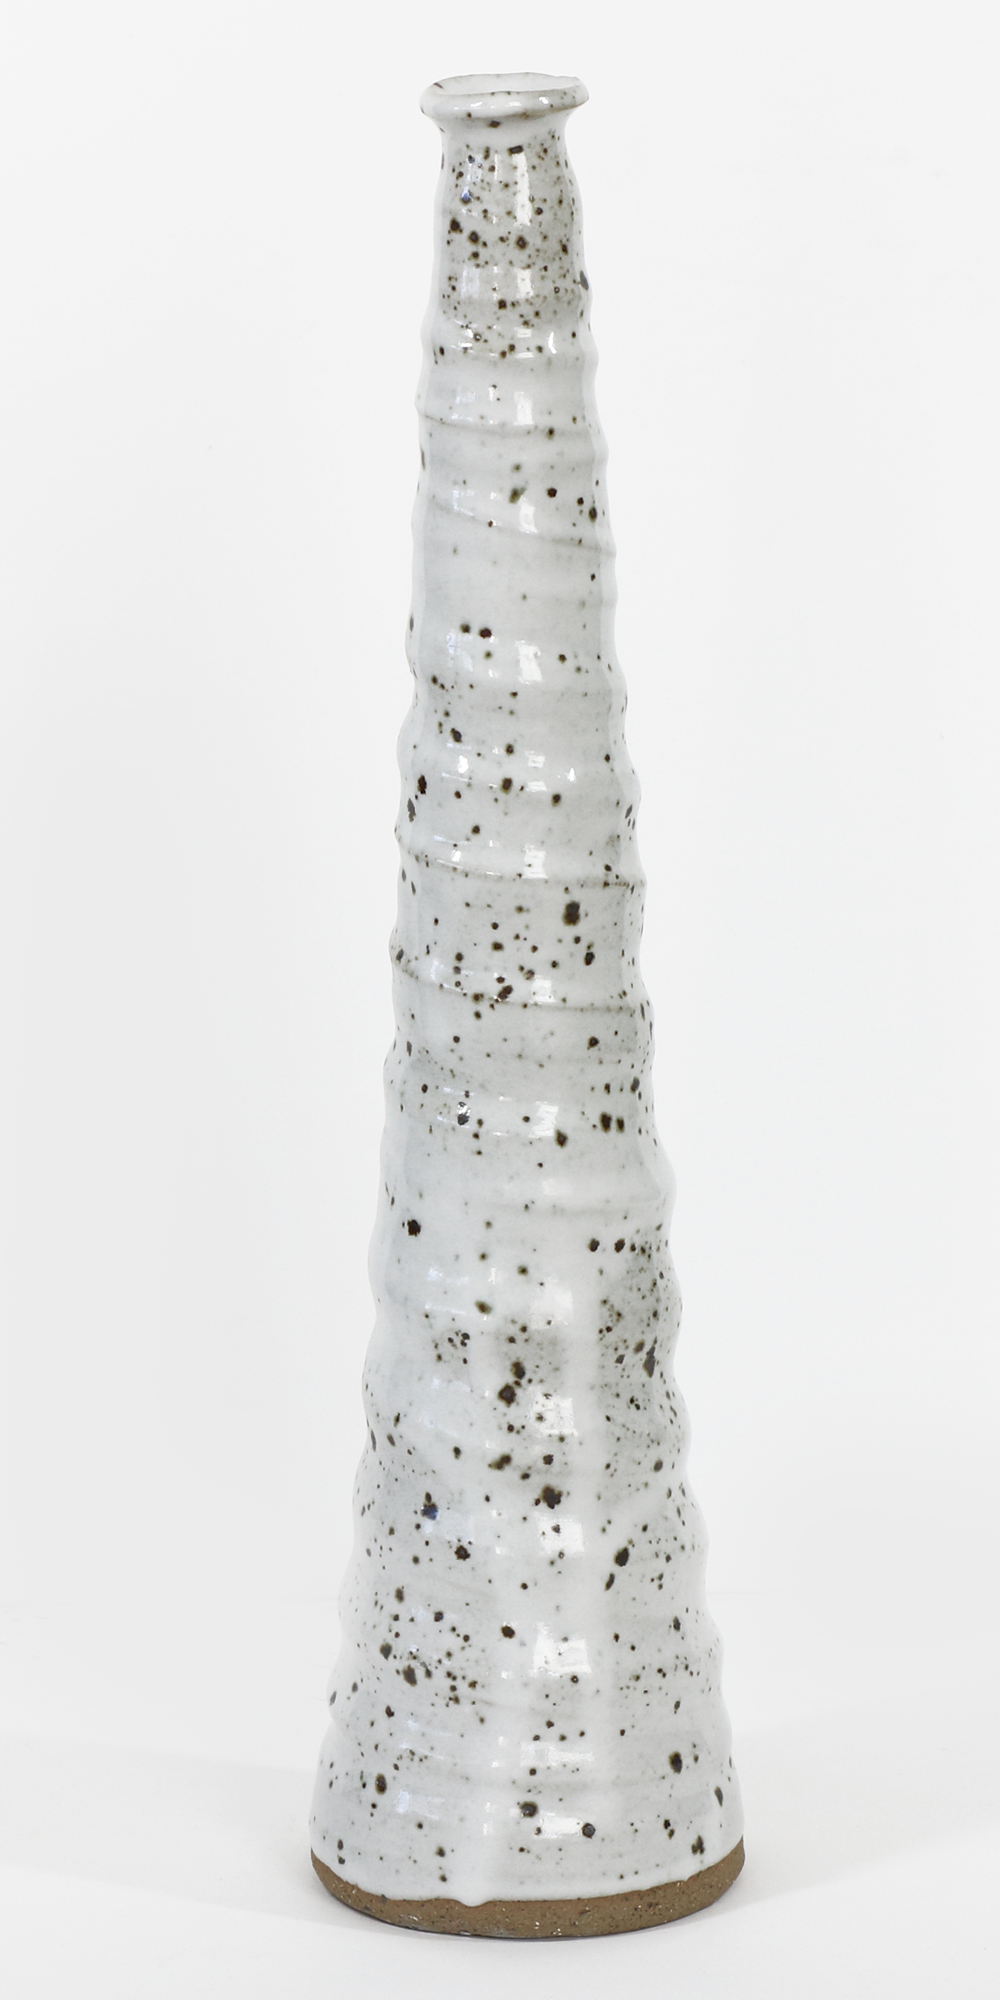 Happiness Vase #4 Ceramic Jacqueline Kampen The Happiness Project